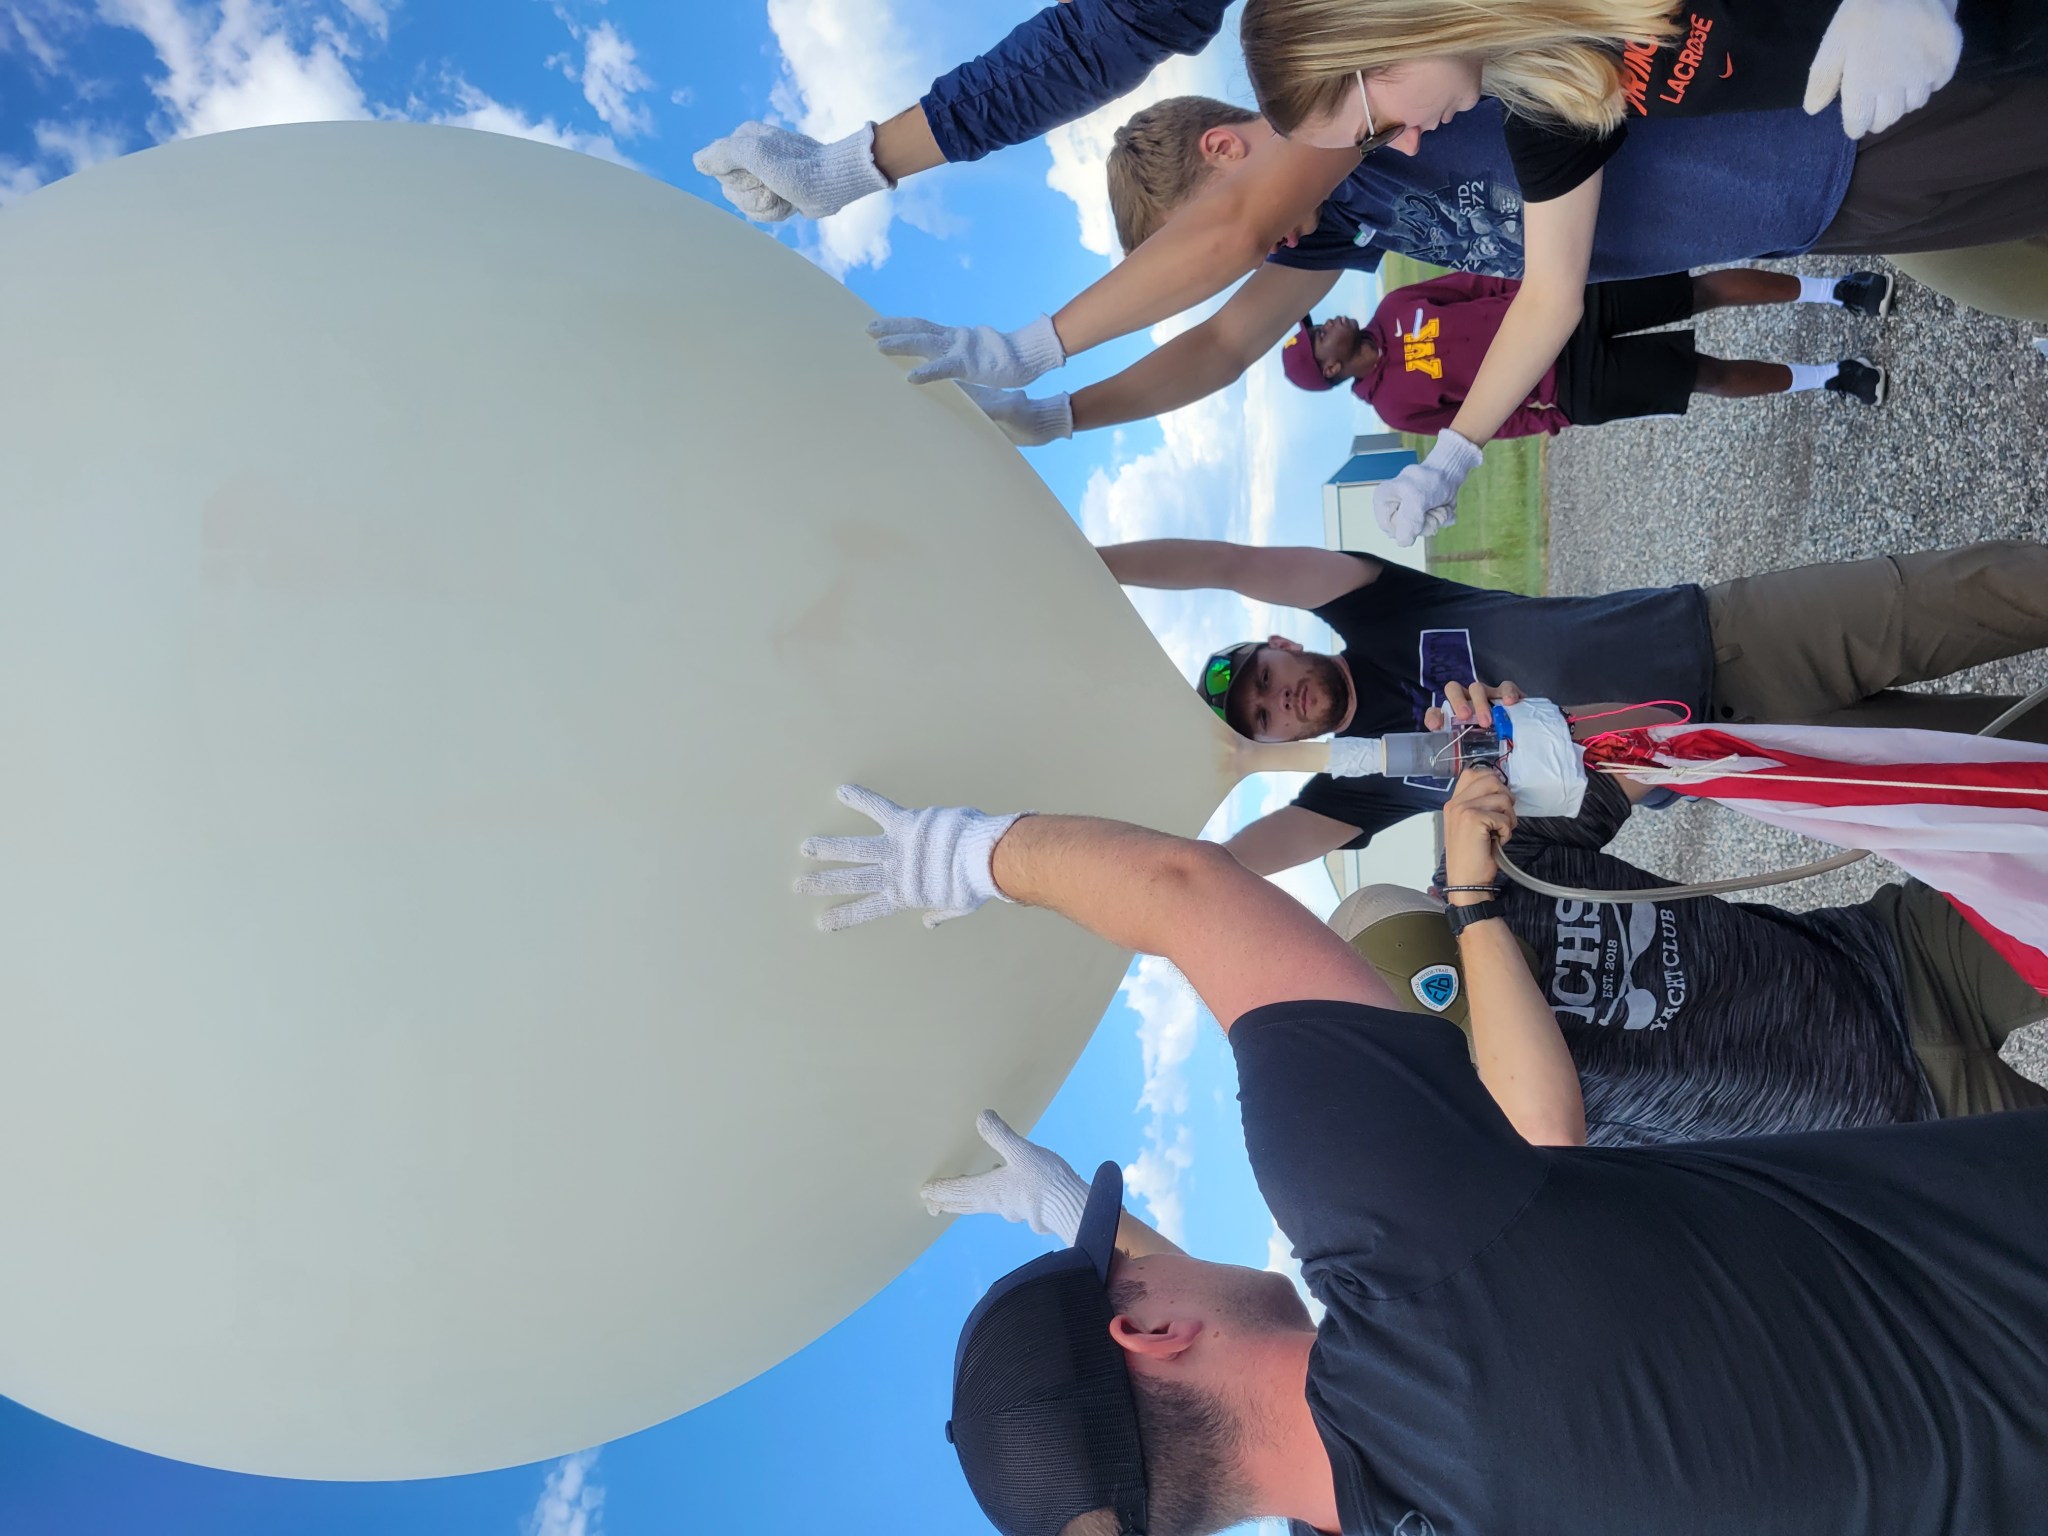 Students setting up a large white weather balloon